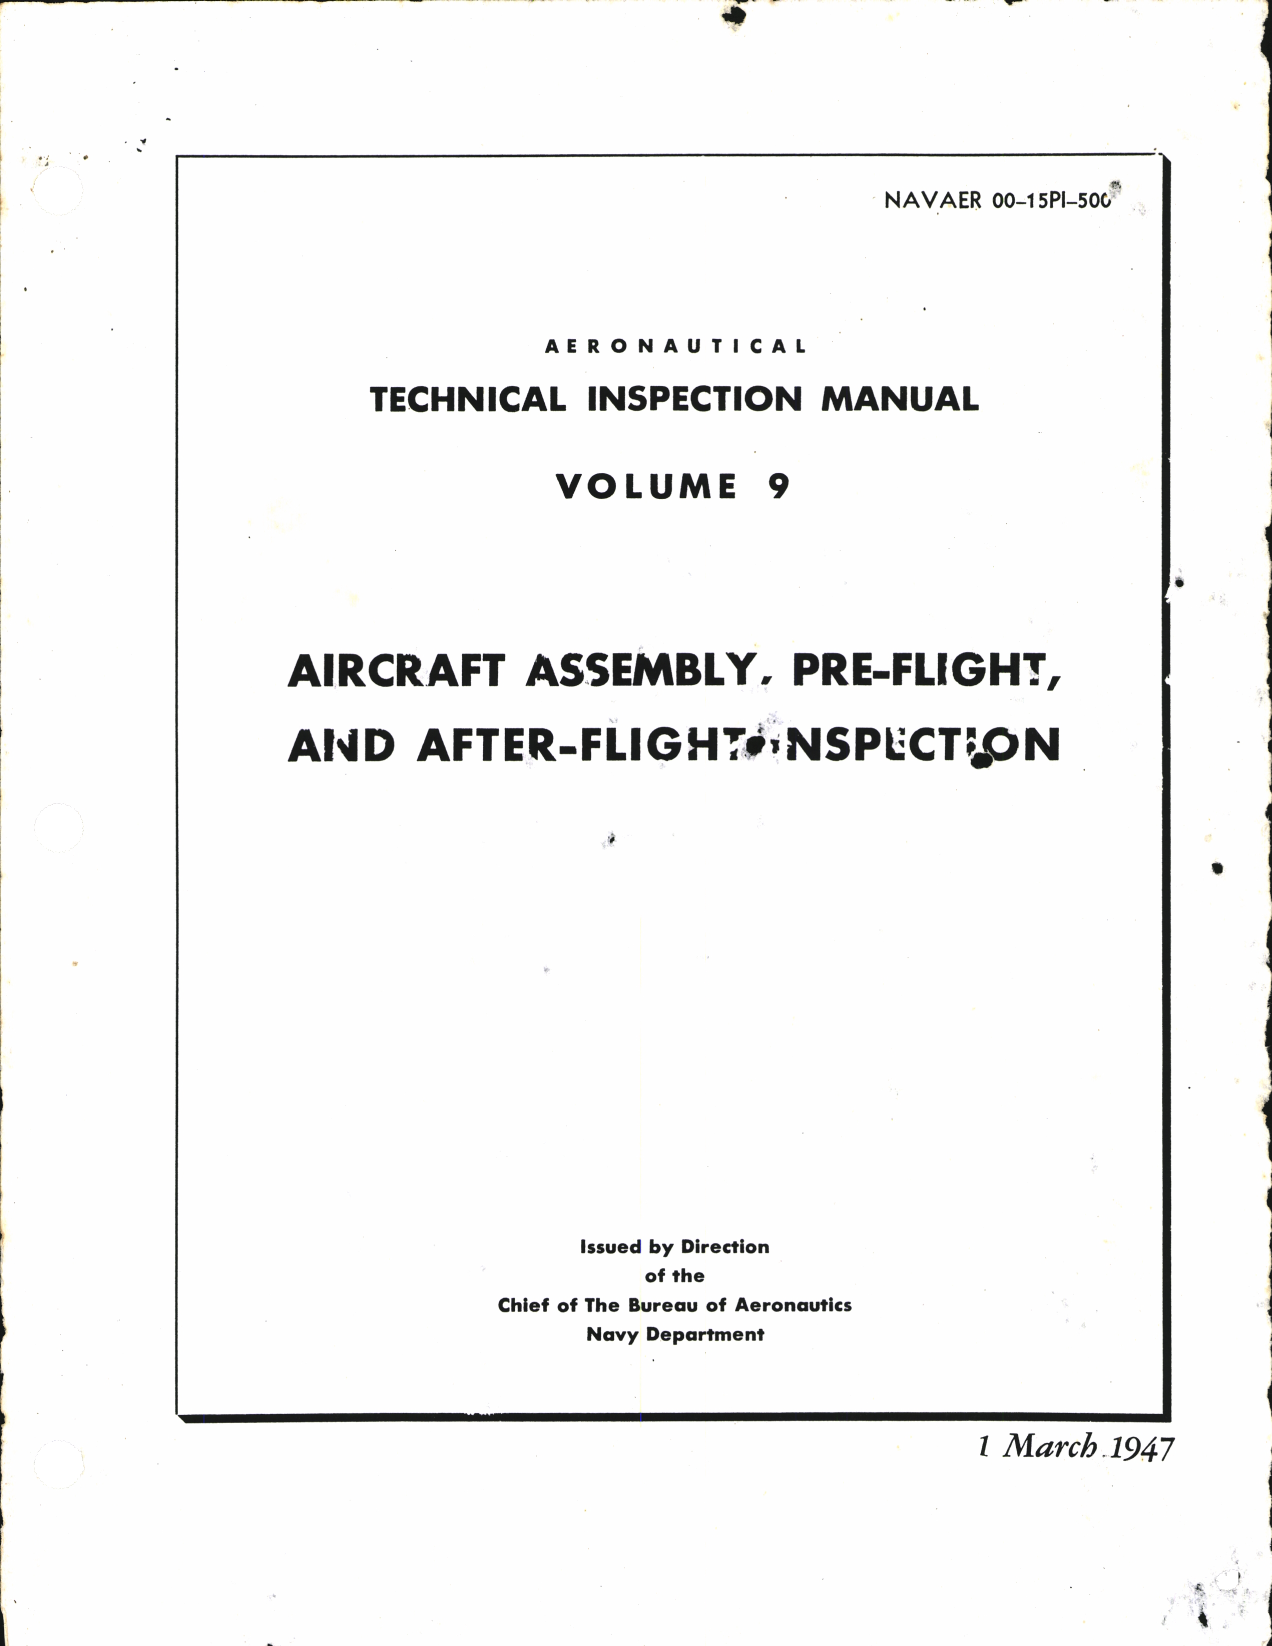 Sample page 1 from AirCorps Library document: Aeronautical Technical Inspection Manual Volume 9, Aircraft Assembly, Pre-Flight and After-Flight Inspection 